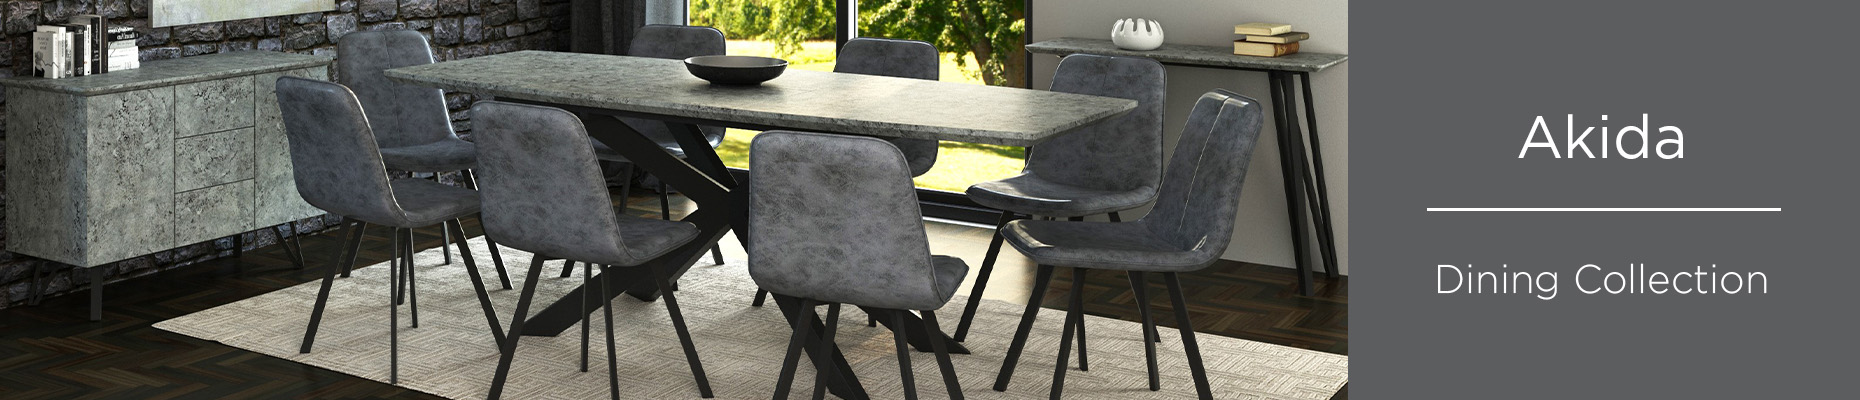 Akida Dining collection at Forrest Furnishing